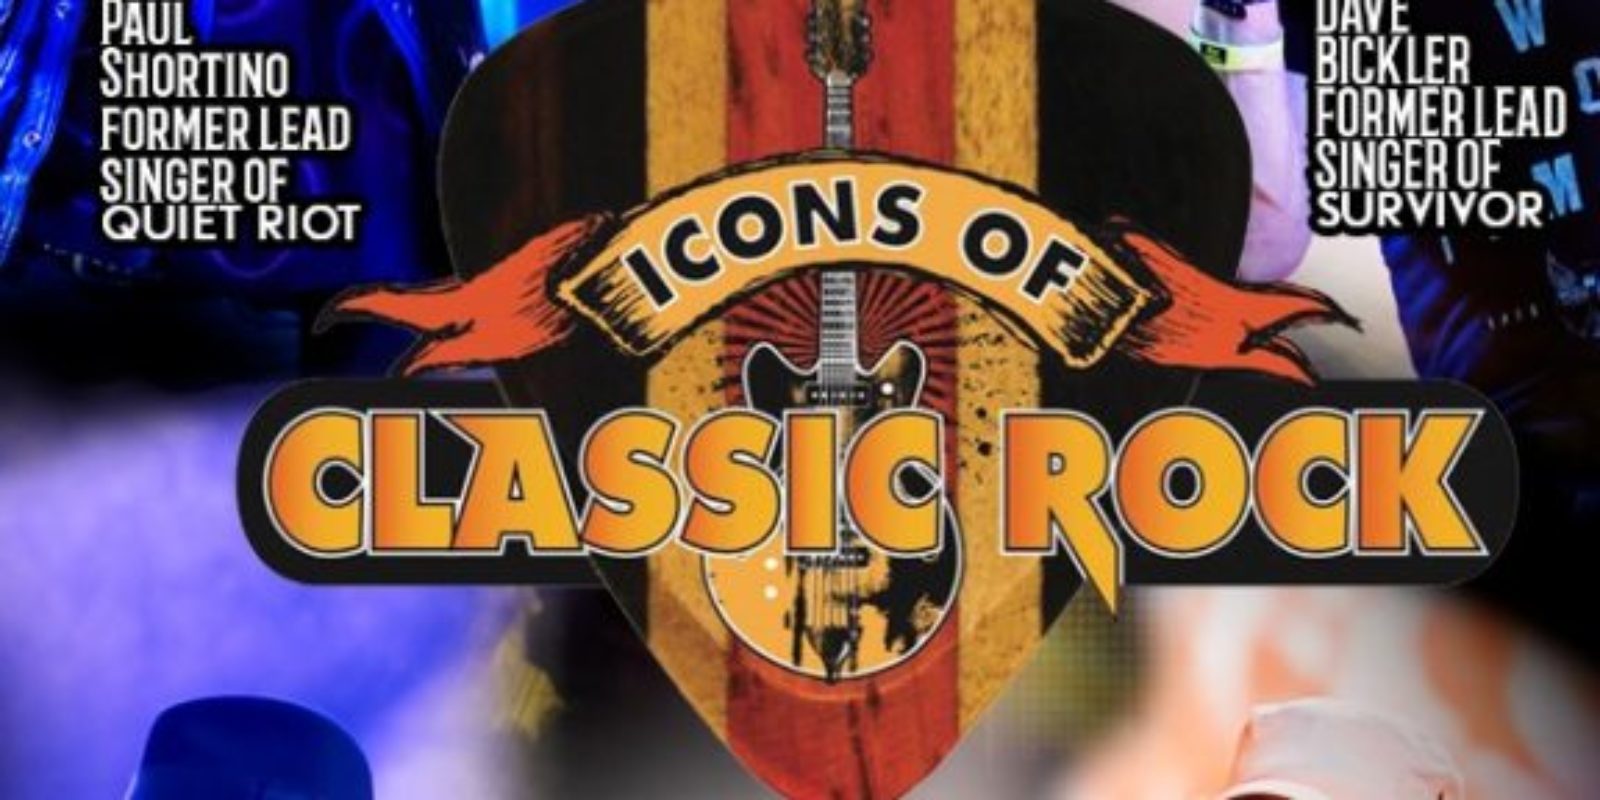 ICONS OF CLASSIC ROCK 2022 STORIES (1)